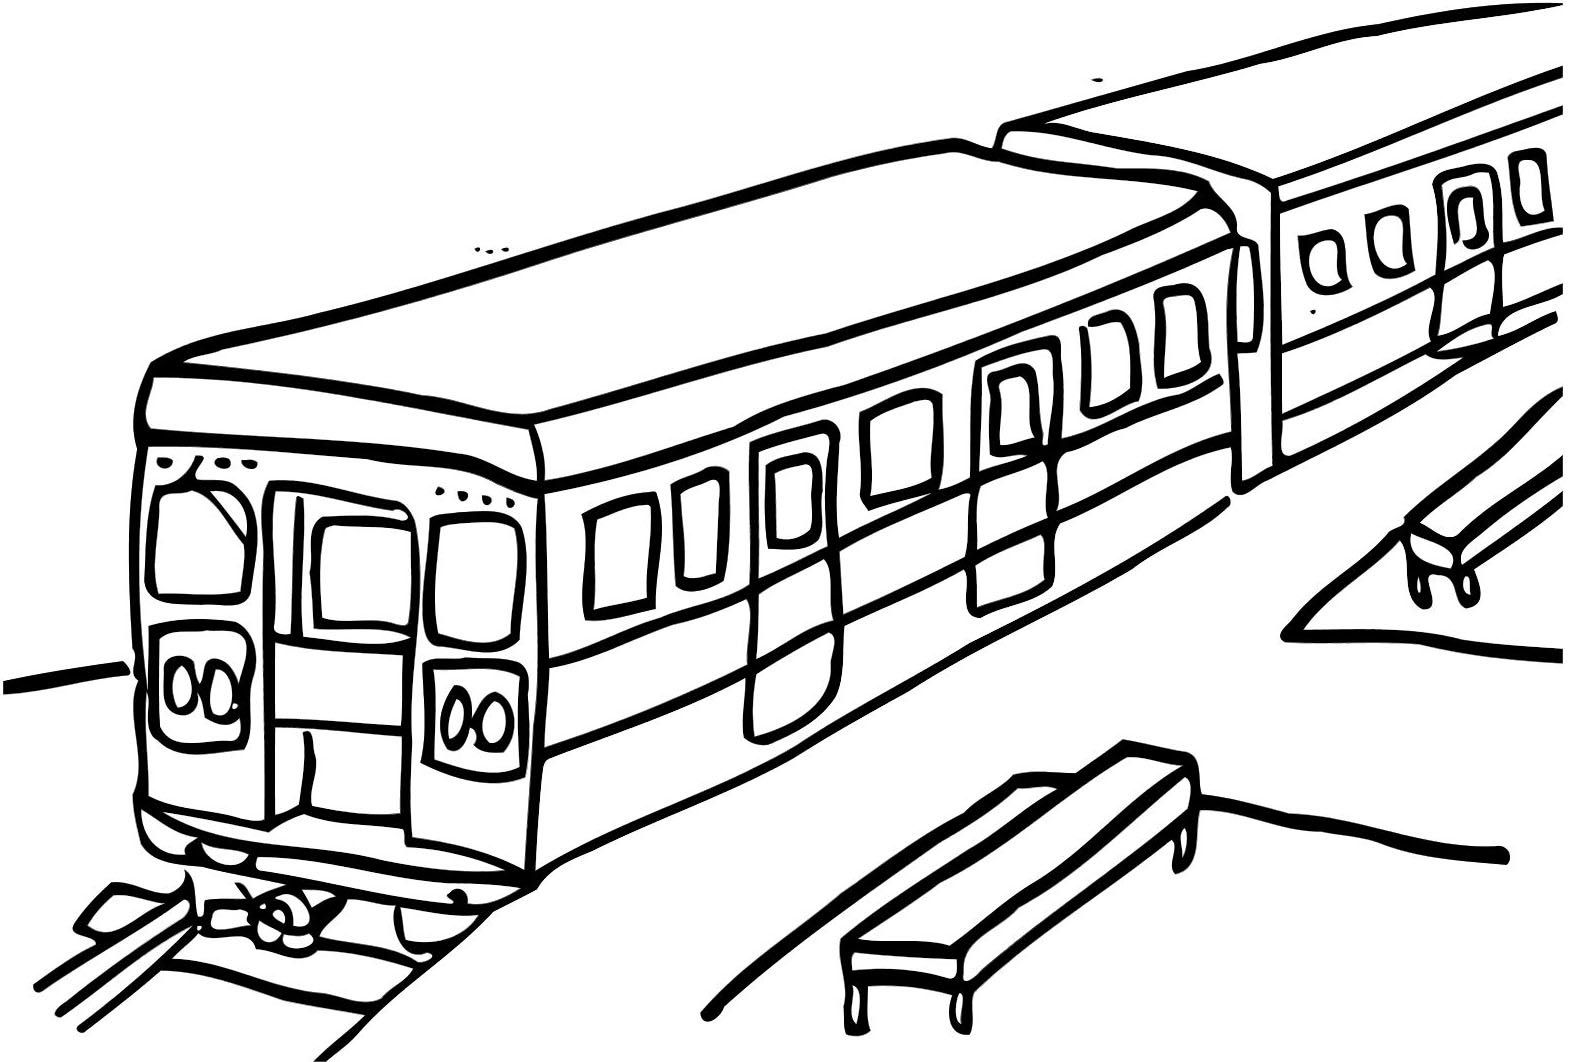 Subway Train Coloring Pages | Train coloring pages, Cars coloring pages, Coloring  pages